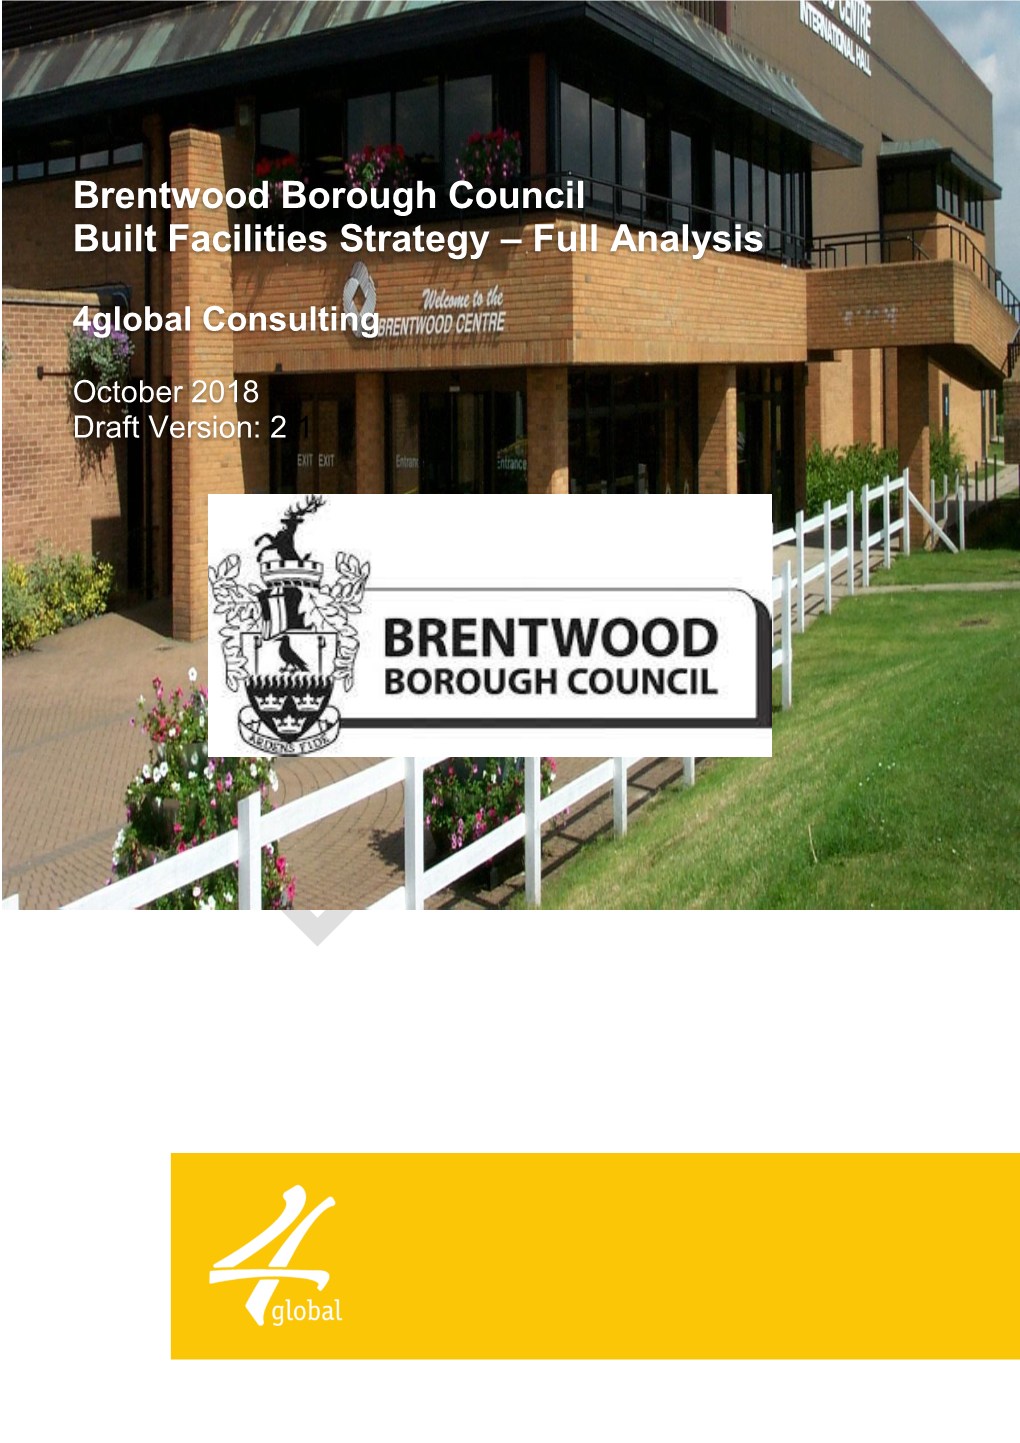 Brentwood Borough Council Built Facilities Strategy – Full Analysis